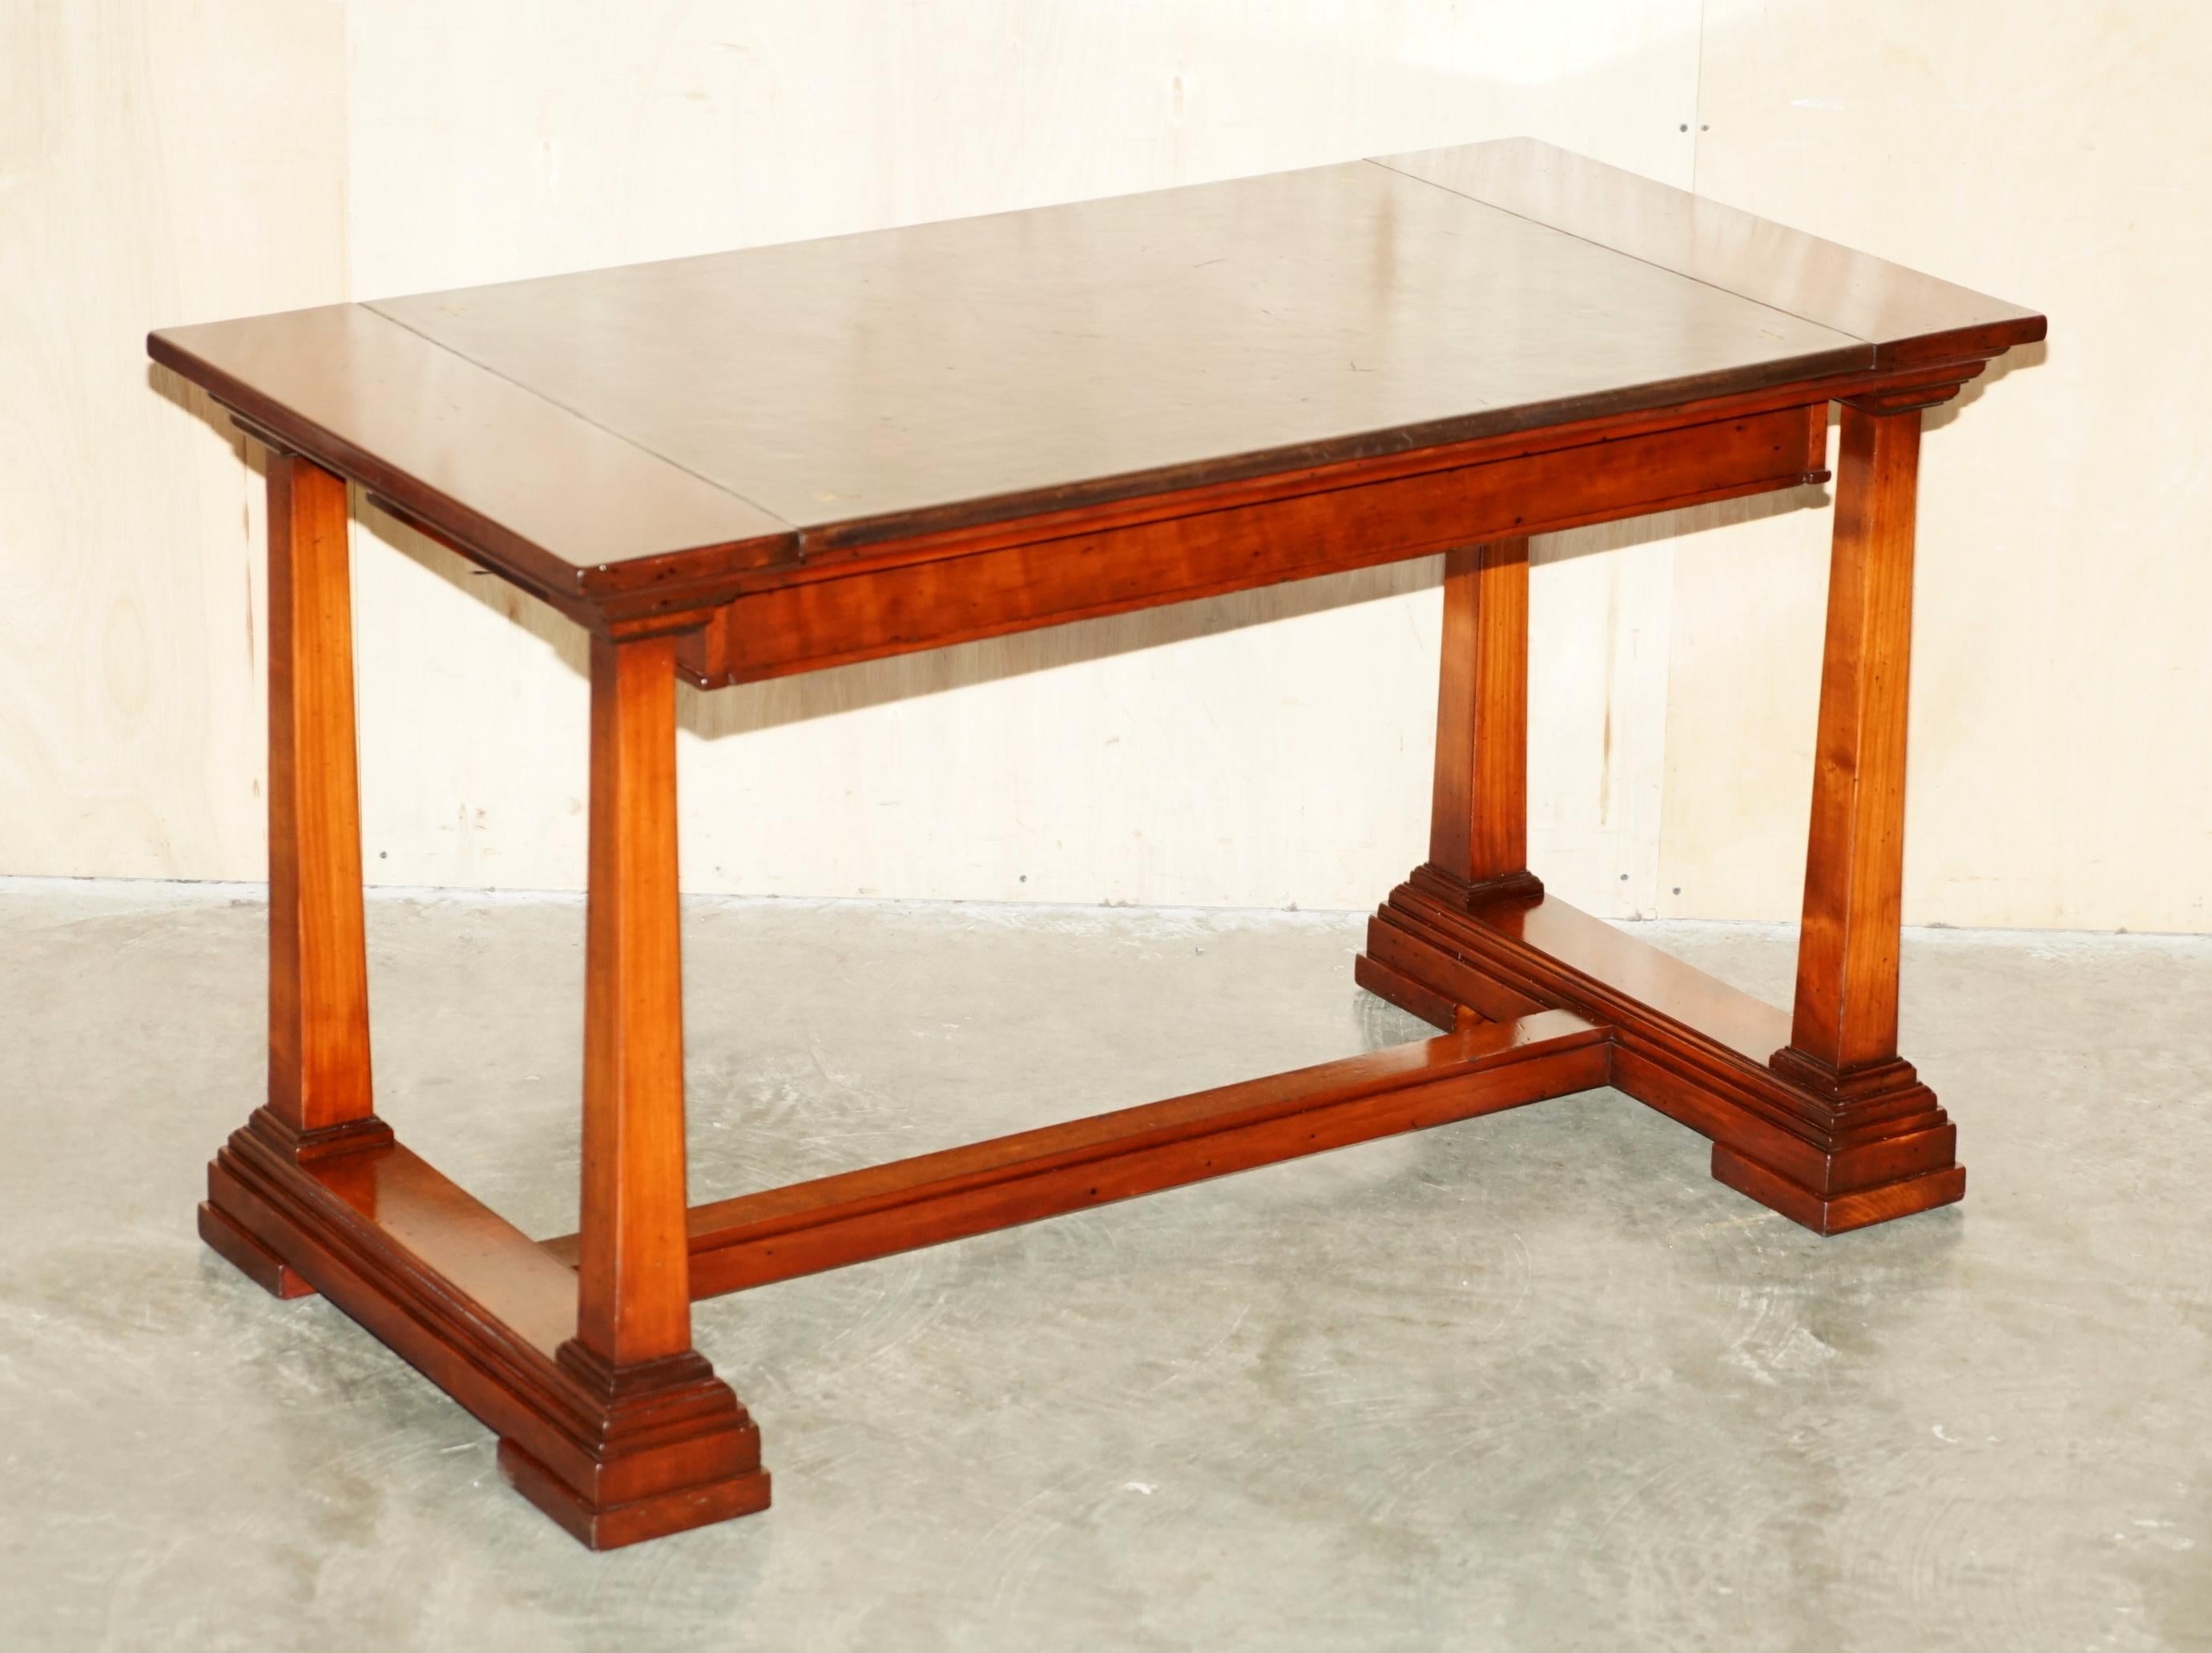 Campaign VINTAGE HARRODS KENNEDY BROWN LEATHER ARITECTURAL WRiTING TABLE OR DESK For Sale